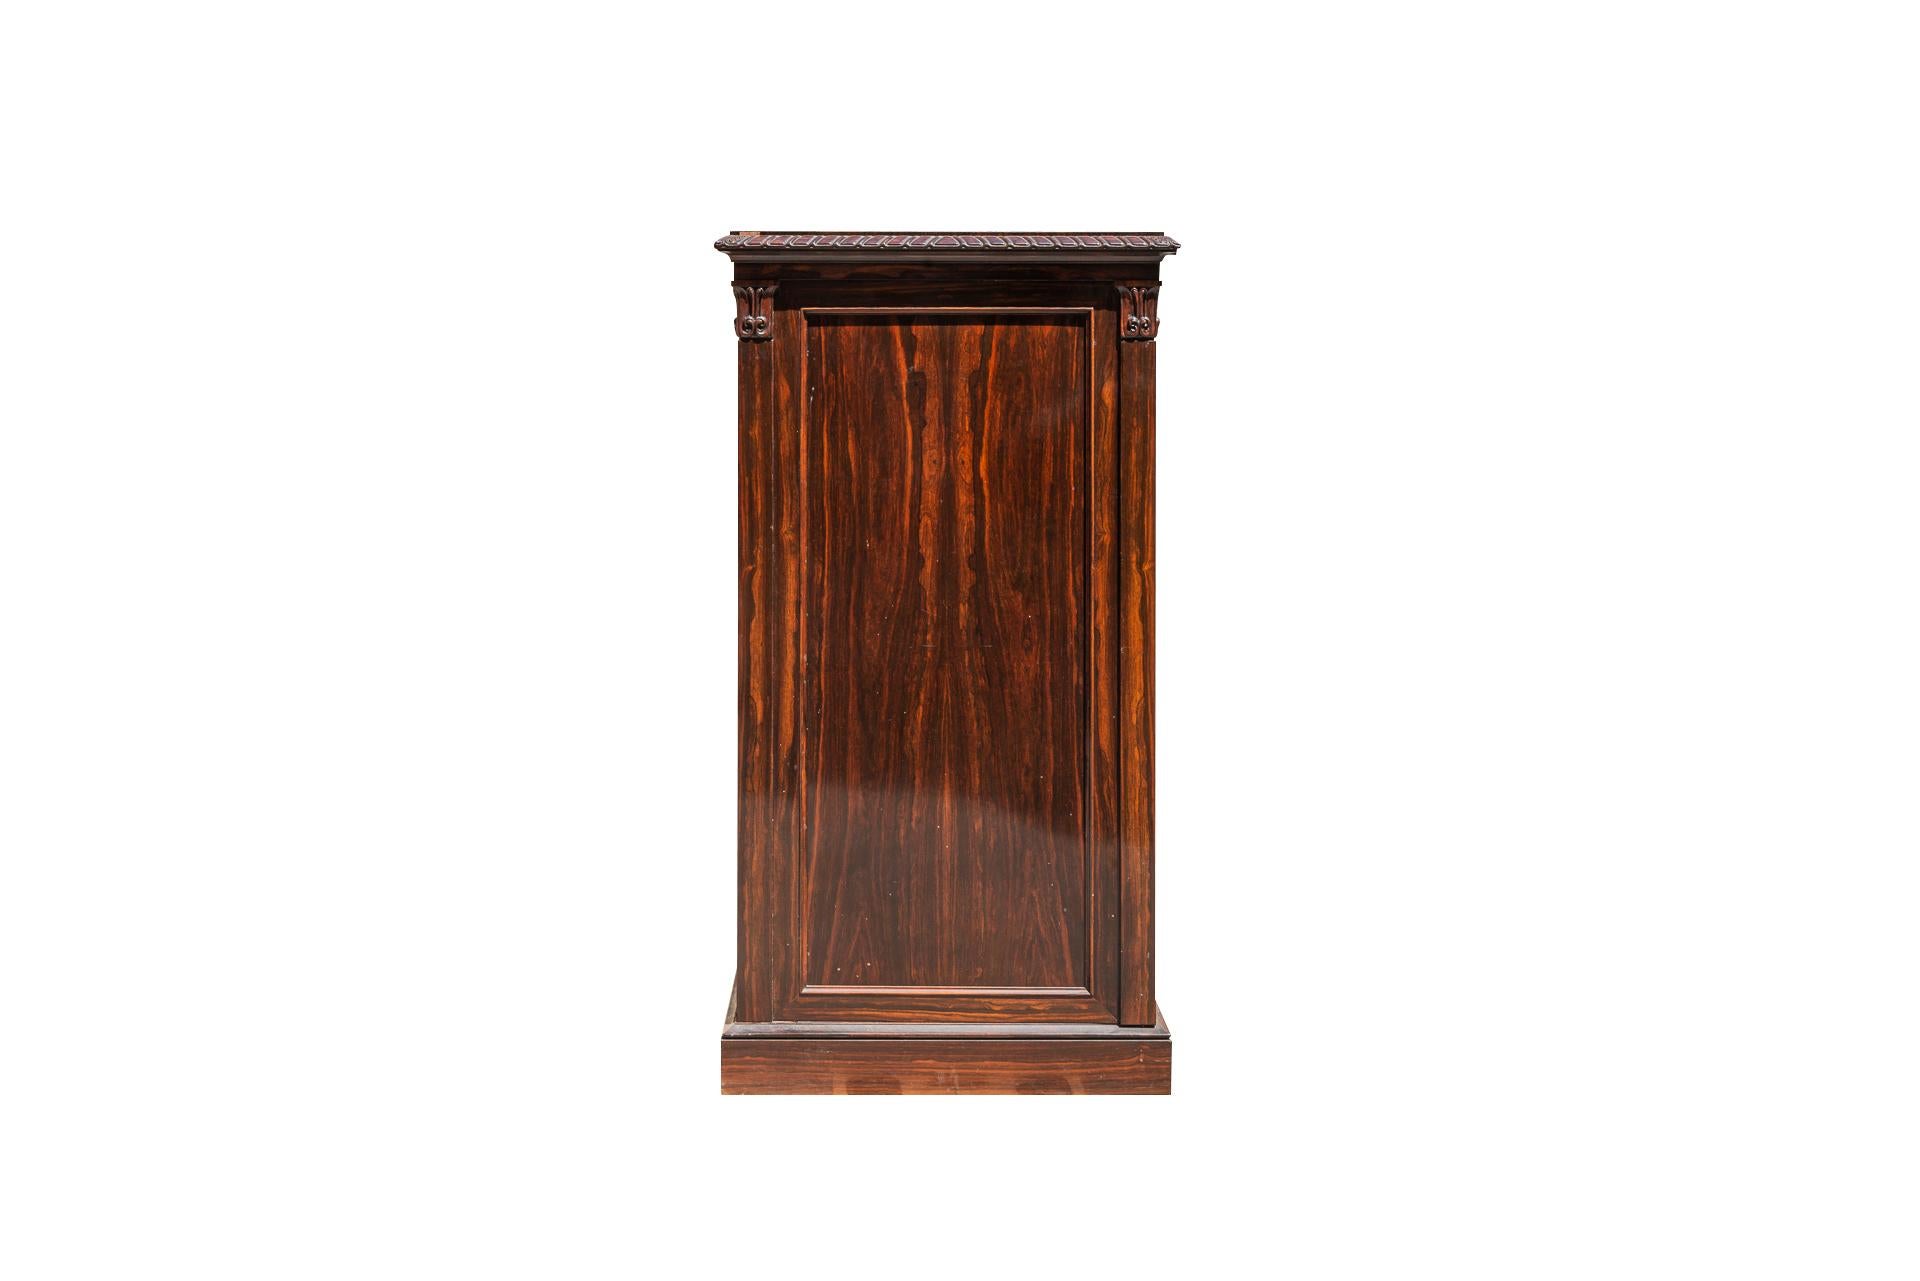 Collector's cabinet, 
Macassar Ebony,
A flap revealing small drawers, sculpted cornice,
Uprights with Corinthian capitals,
circa 1880, England. 

Measures: Height 137 cm, width 73 cm, depth 40 cm.